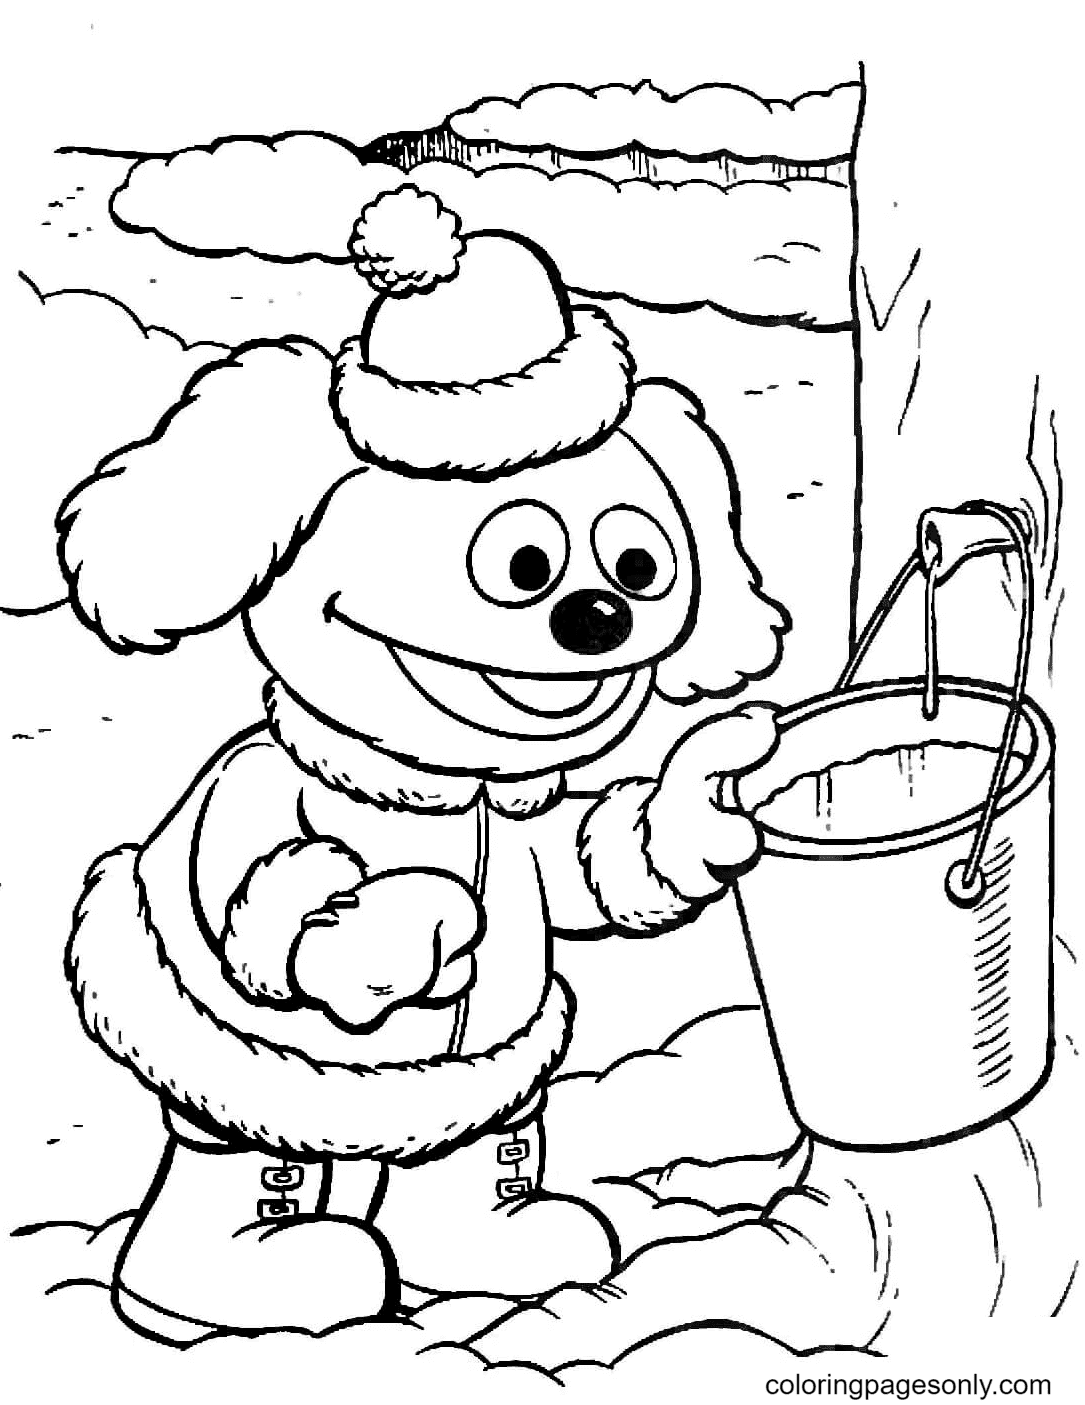 Rowlf Collects Some Water Coloring Page